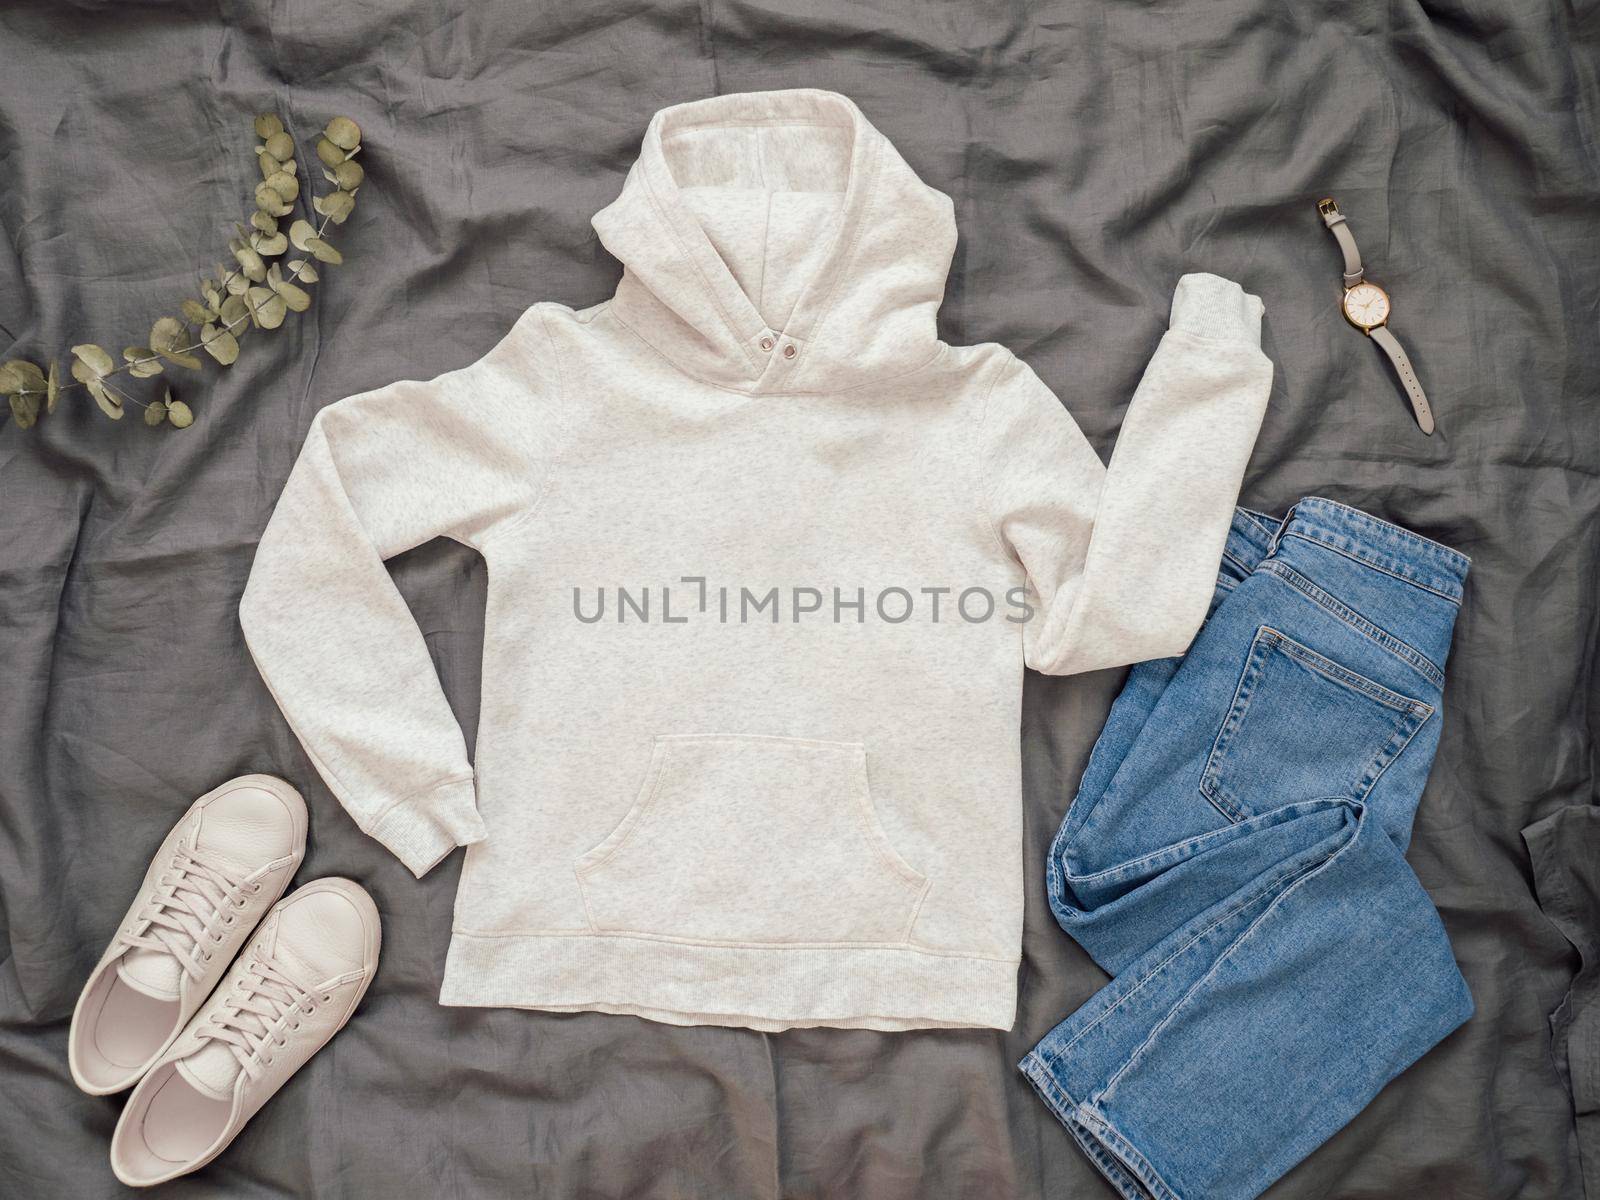 Fashionable look with white empty hoody, jeans and white sneakers. Top view of white blank hoody with long sleeves over gray bed linen. Mock up for hoody print design.